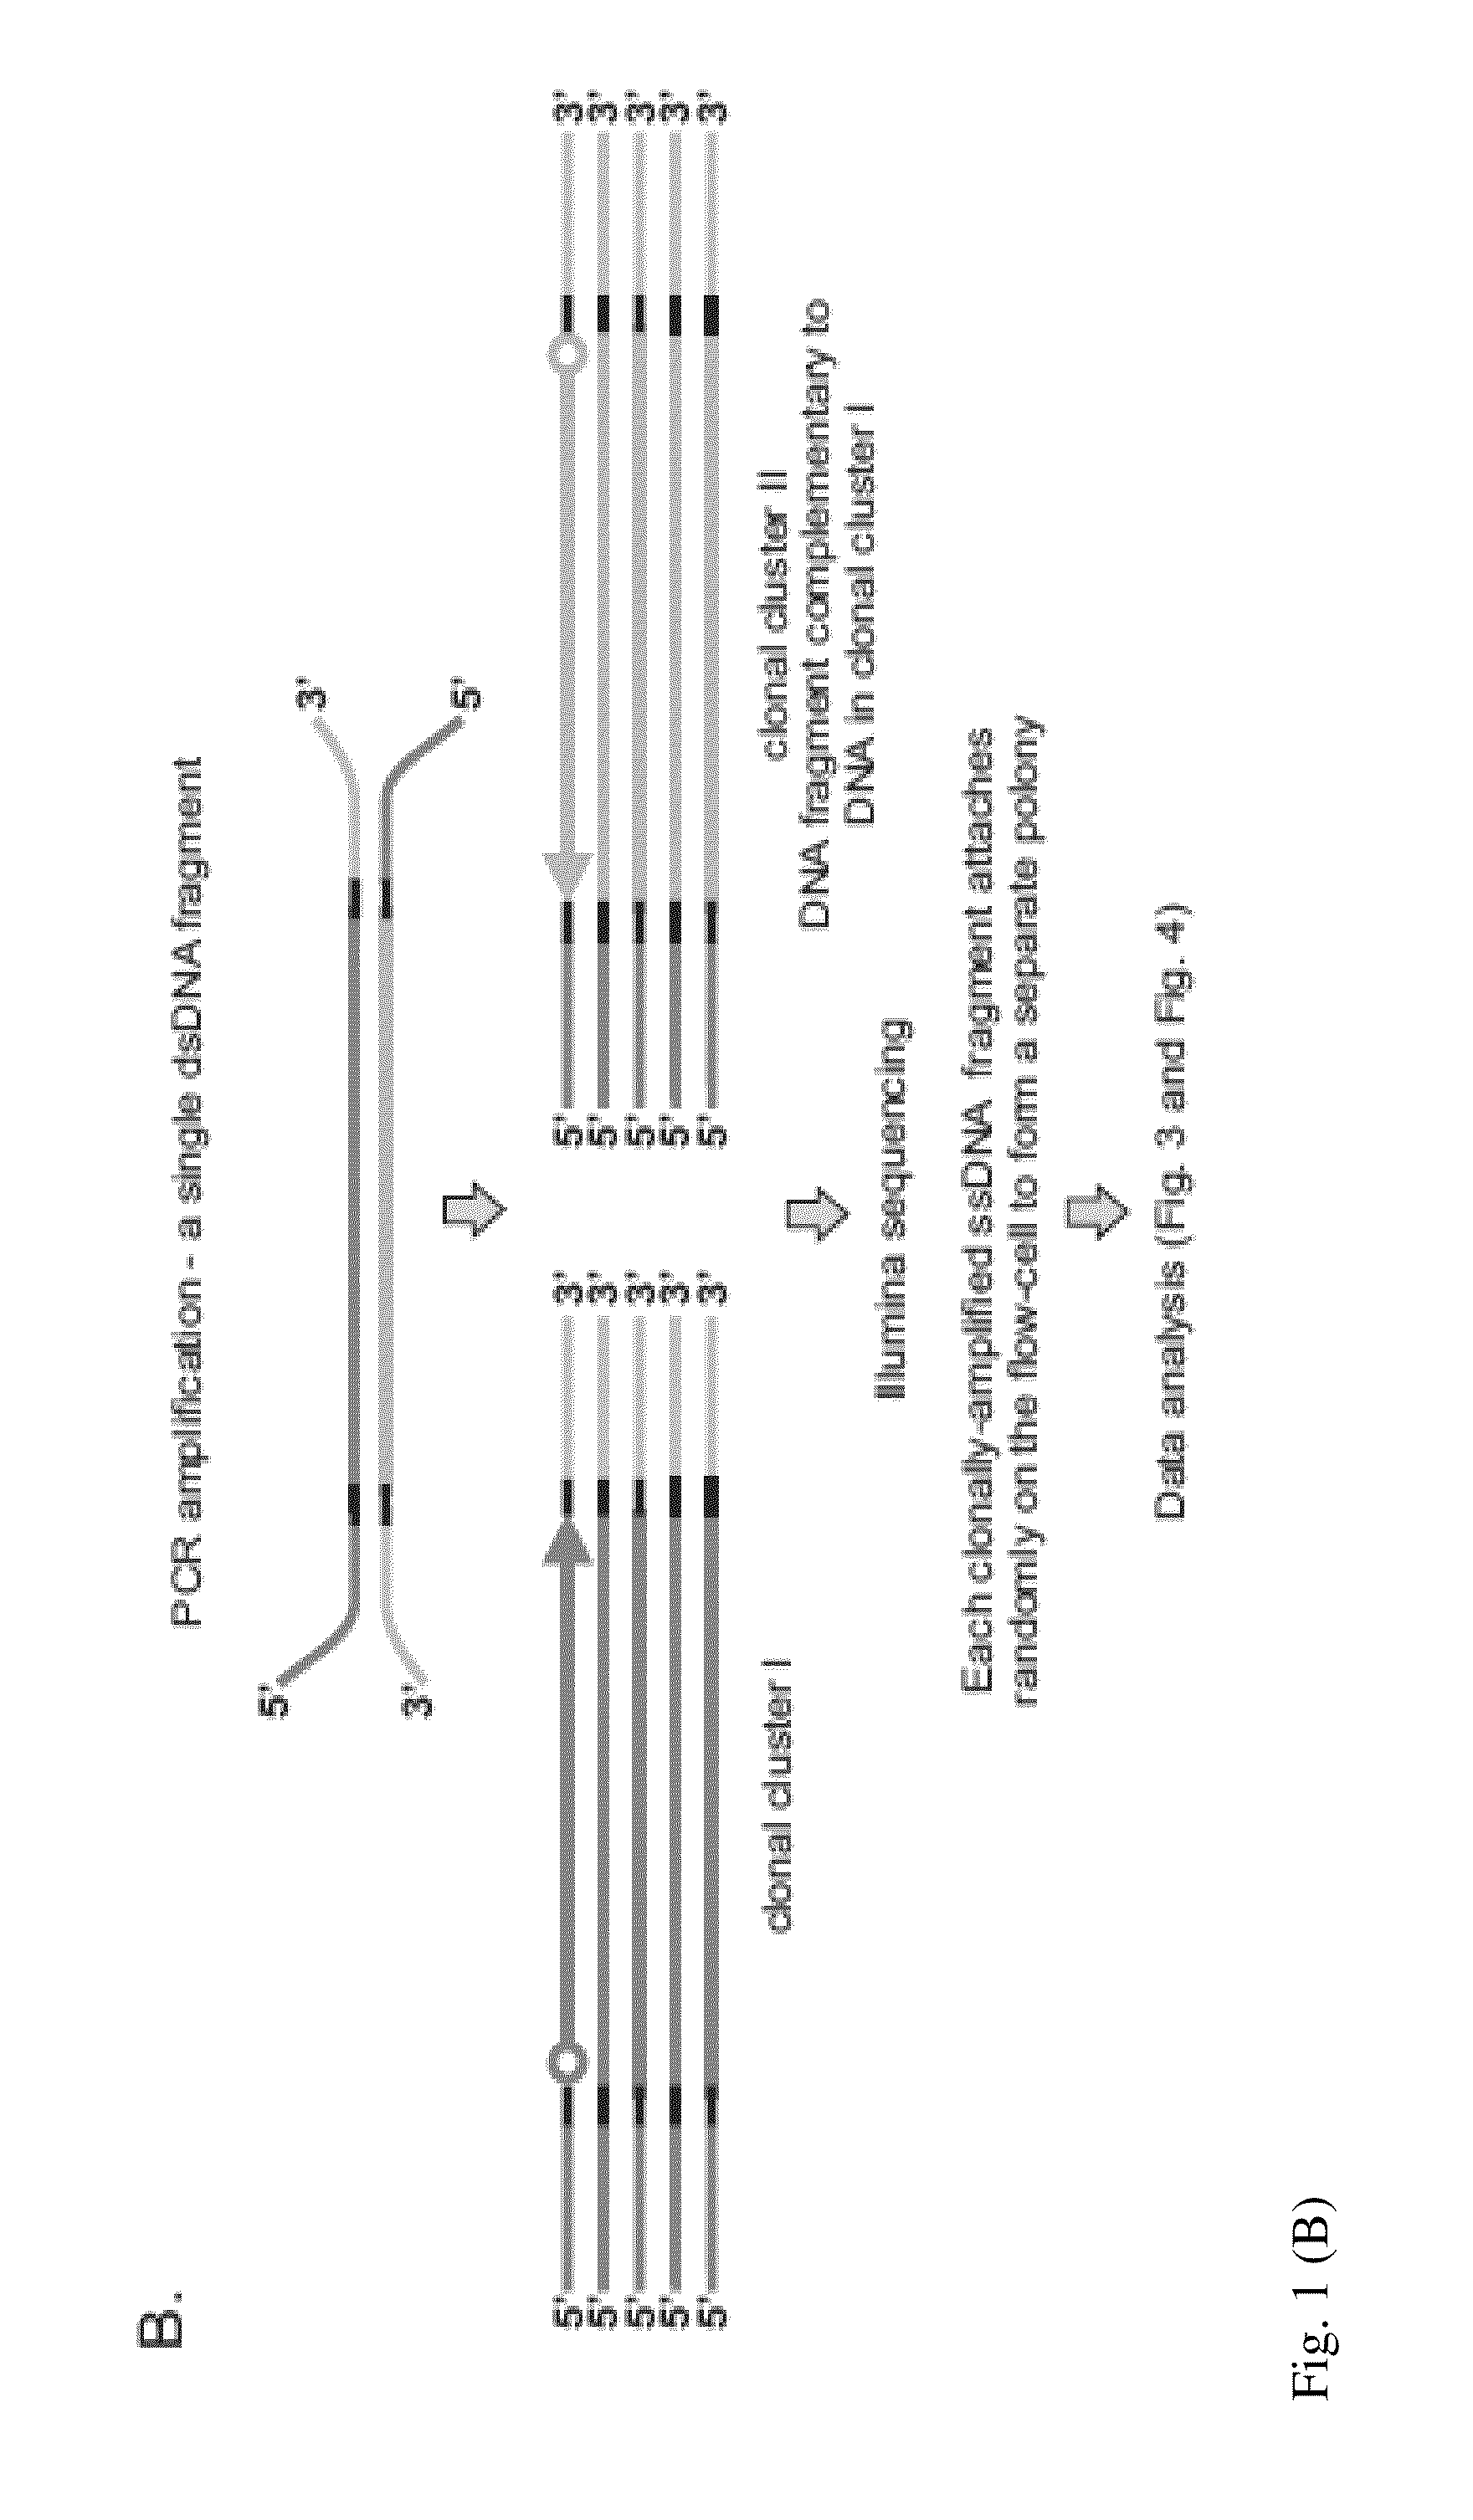 Method for Accurate Sequencing of DNA